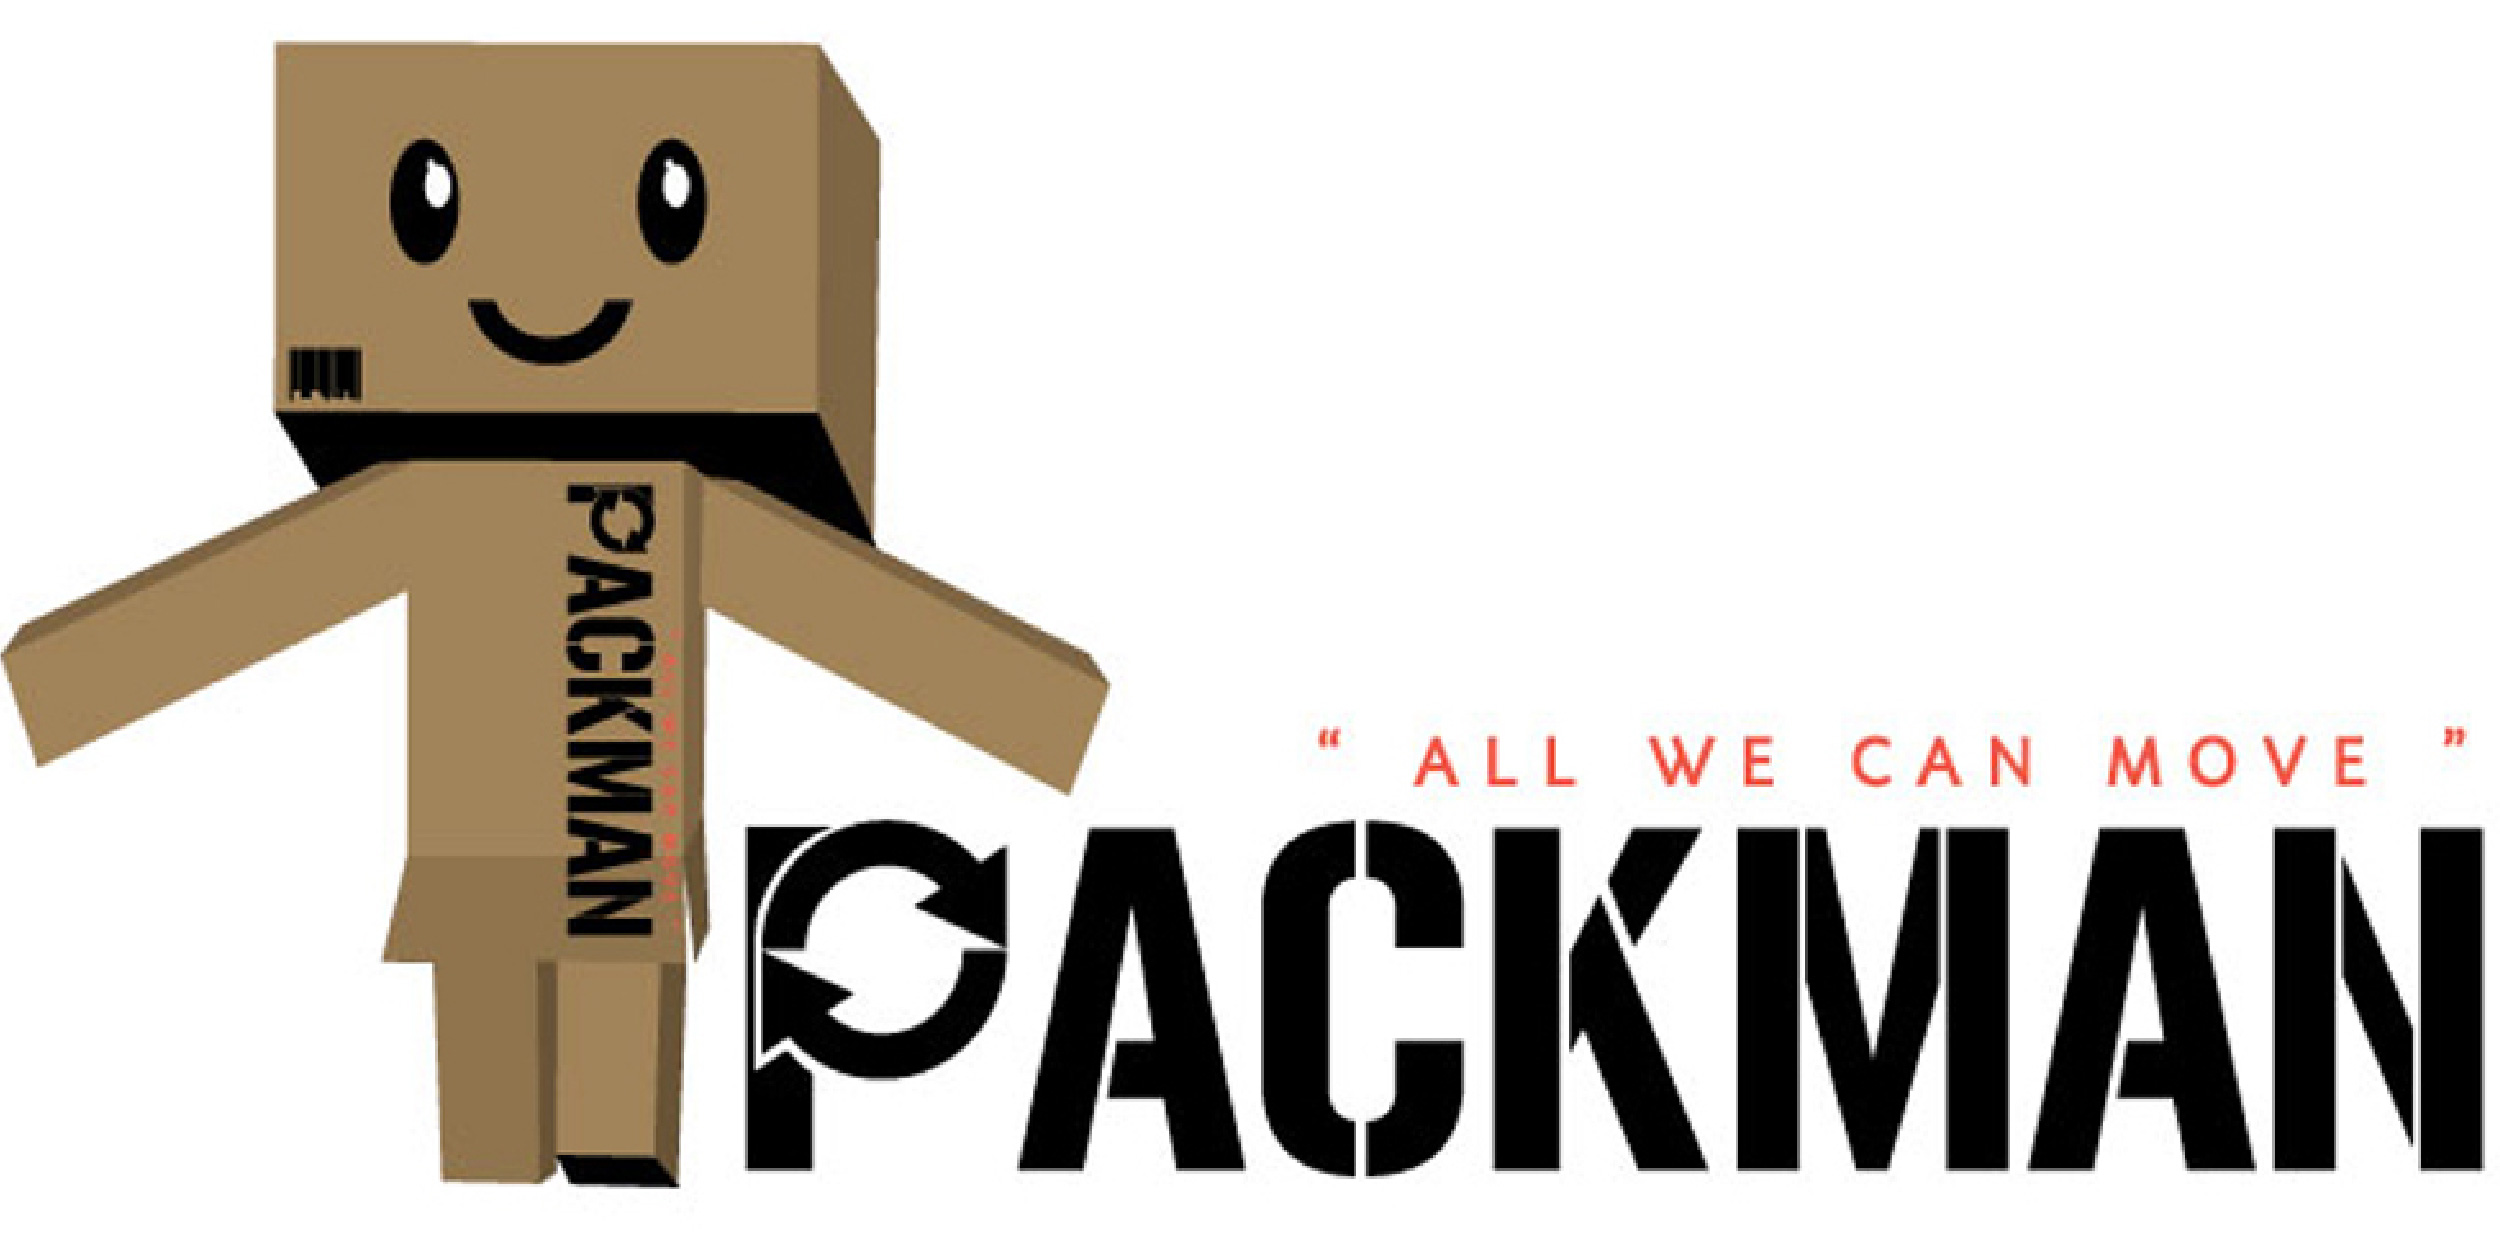 Packman Mover-01.jpg